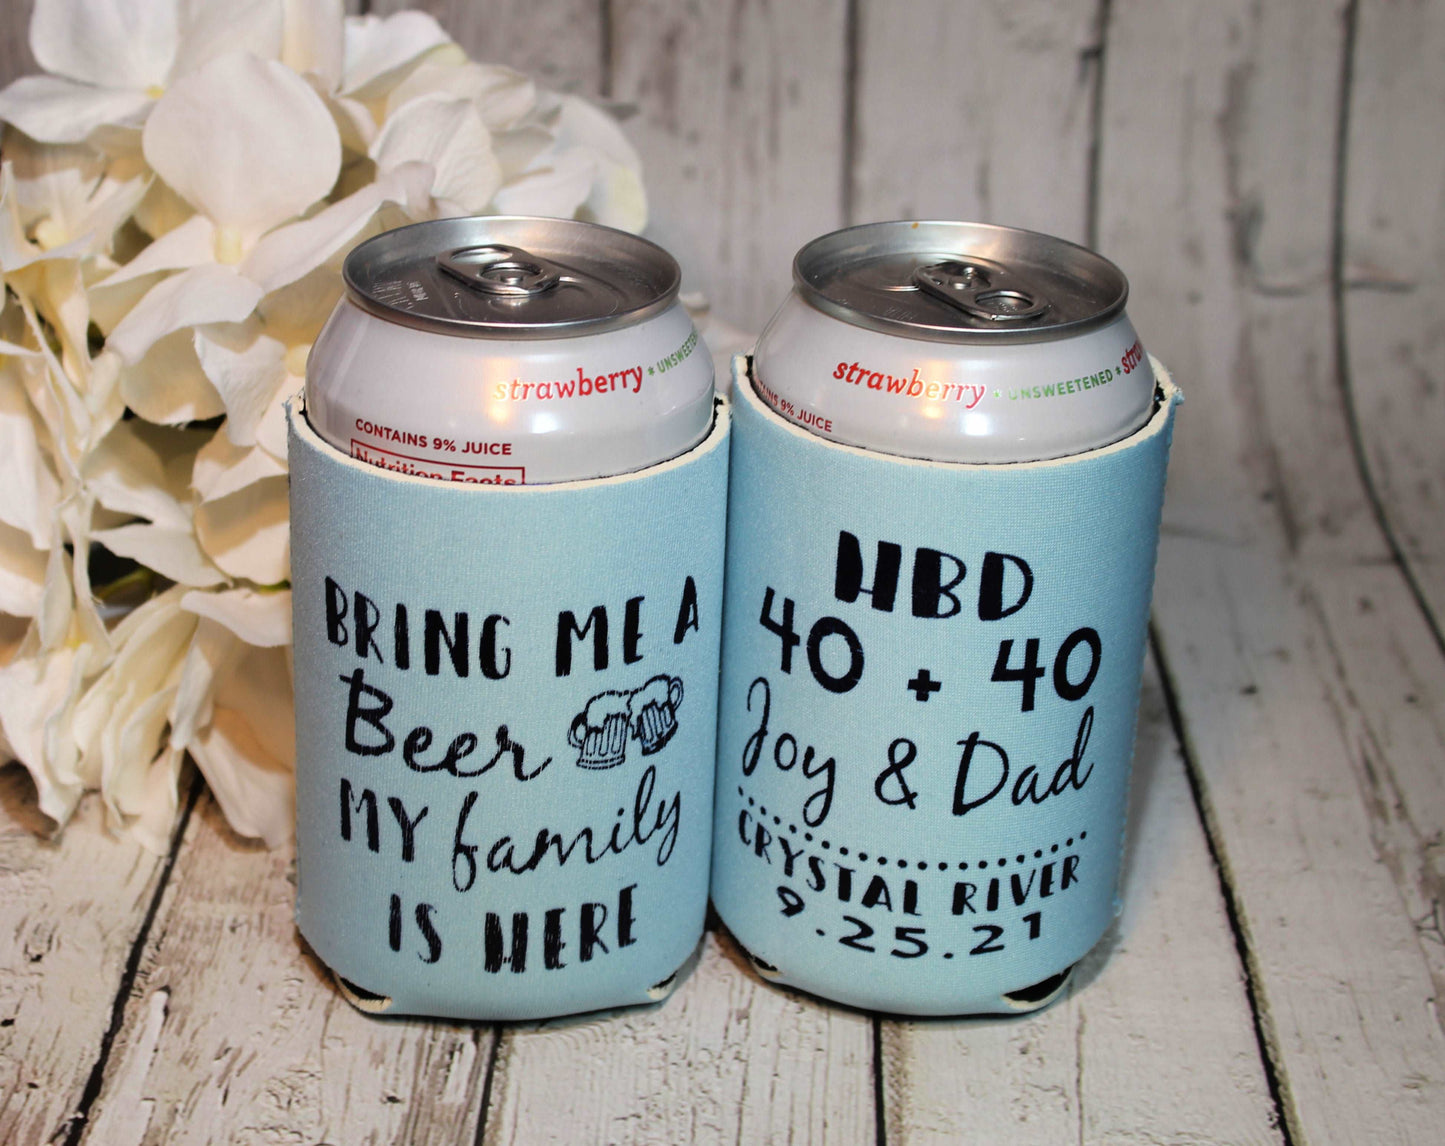 Bring Me a Beer My Family Is Here Screen Printed Can Cooler